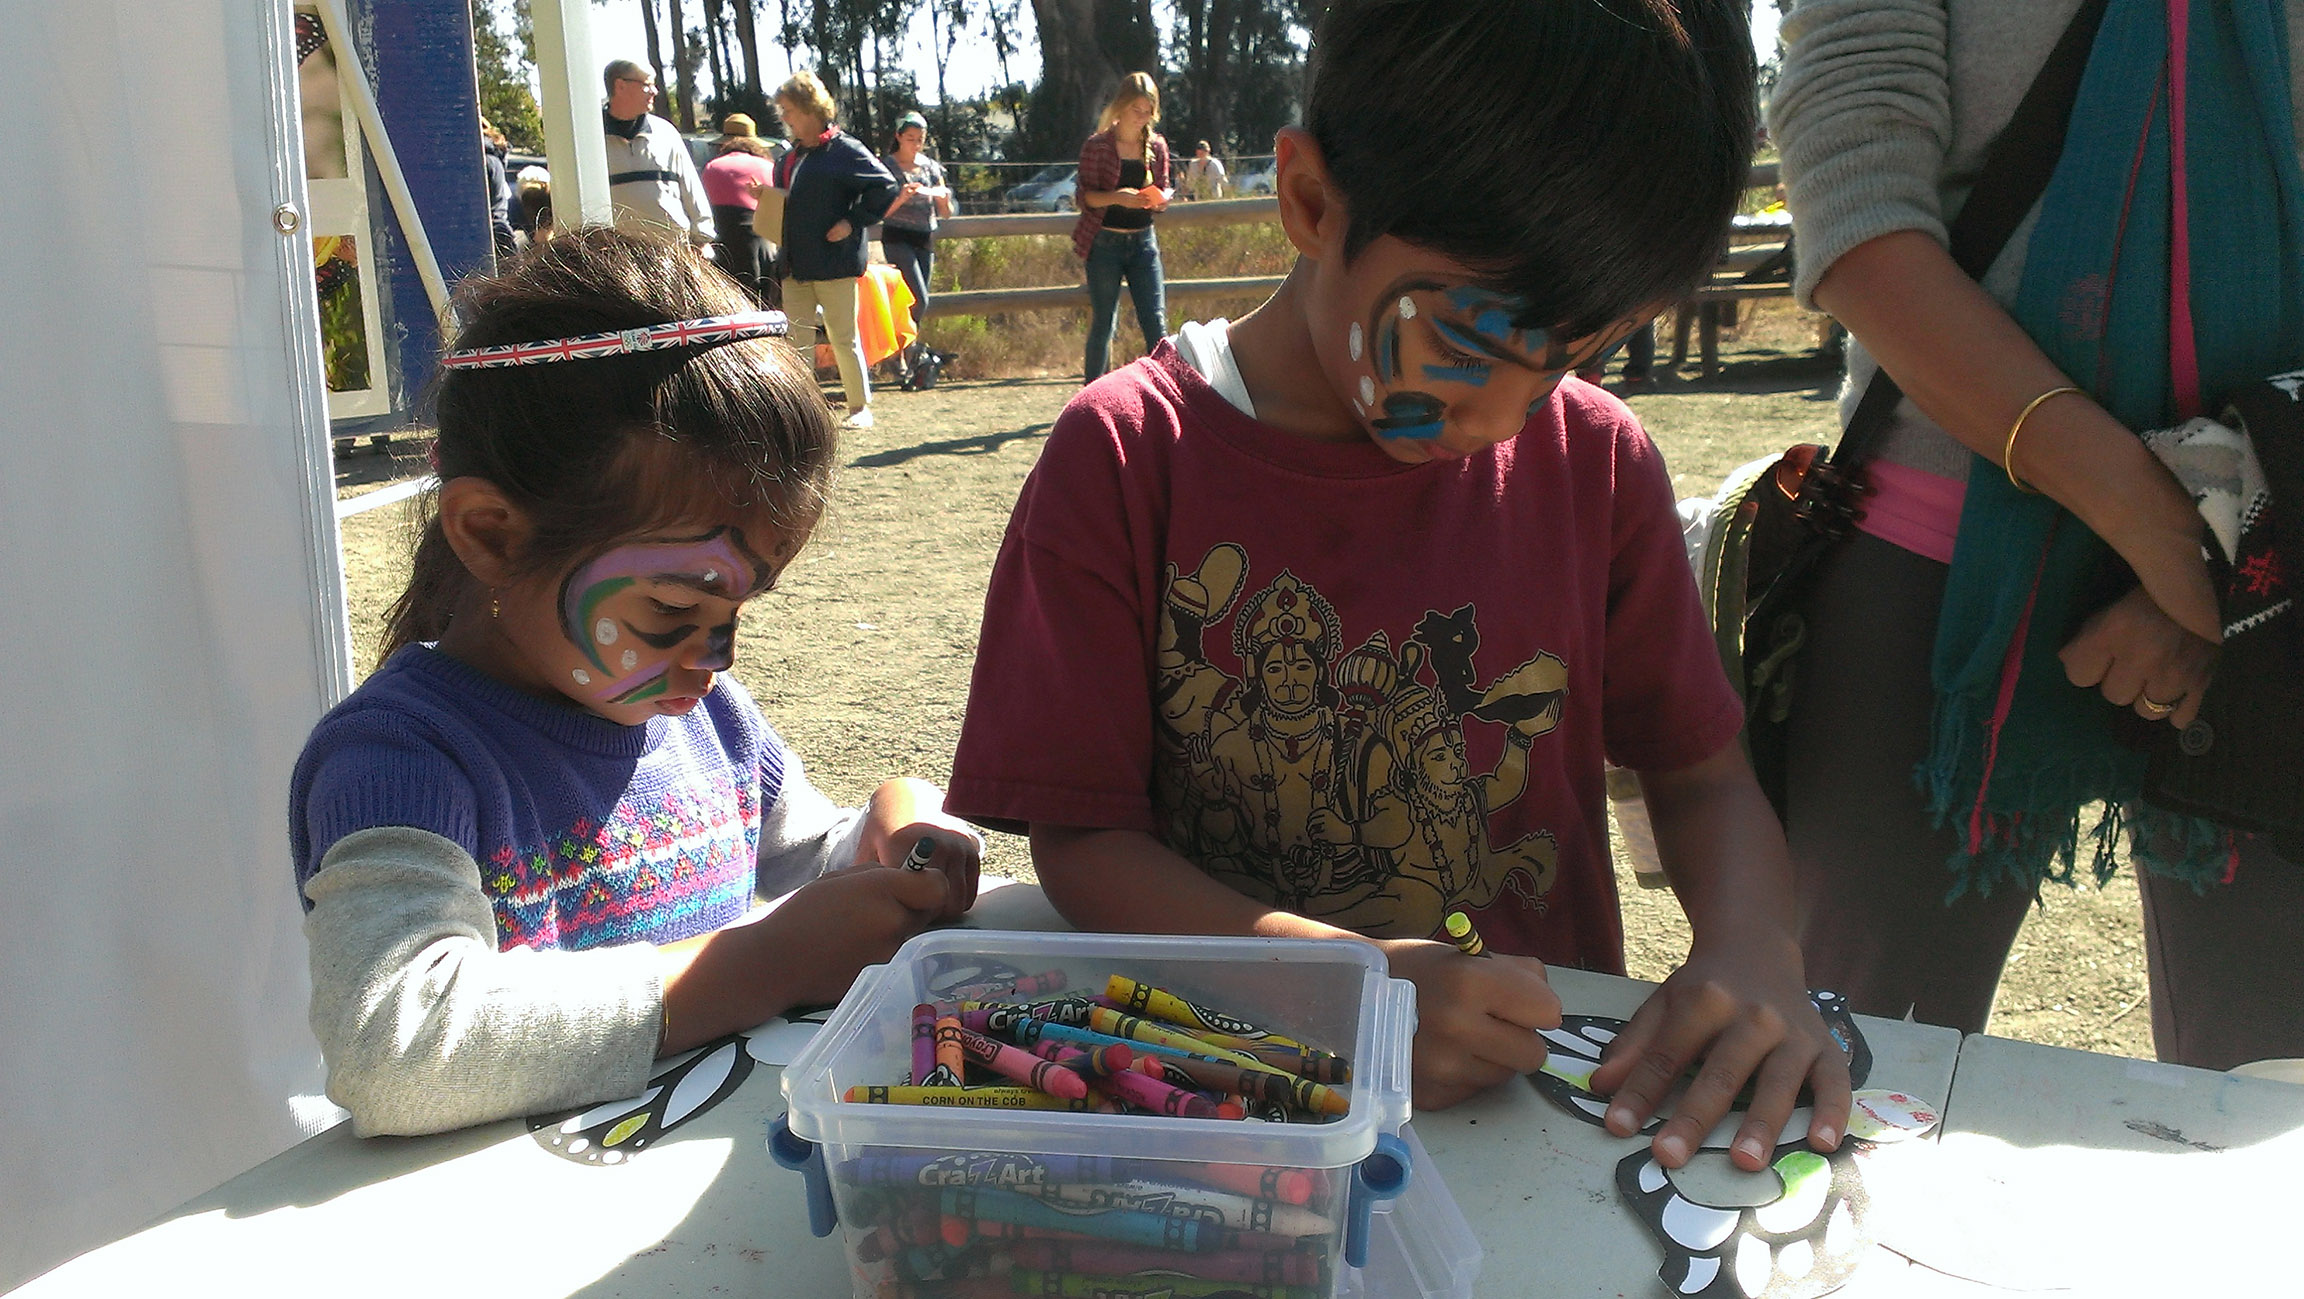 Two children, their faces decorated with face paints, concentrate on coloring monarch butterfly drawings